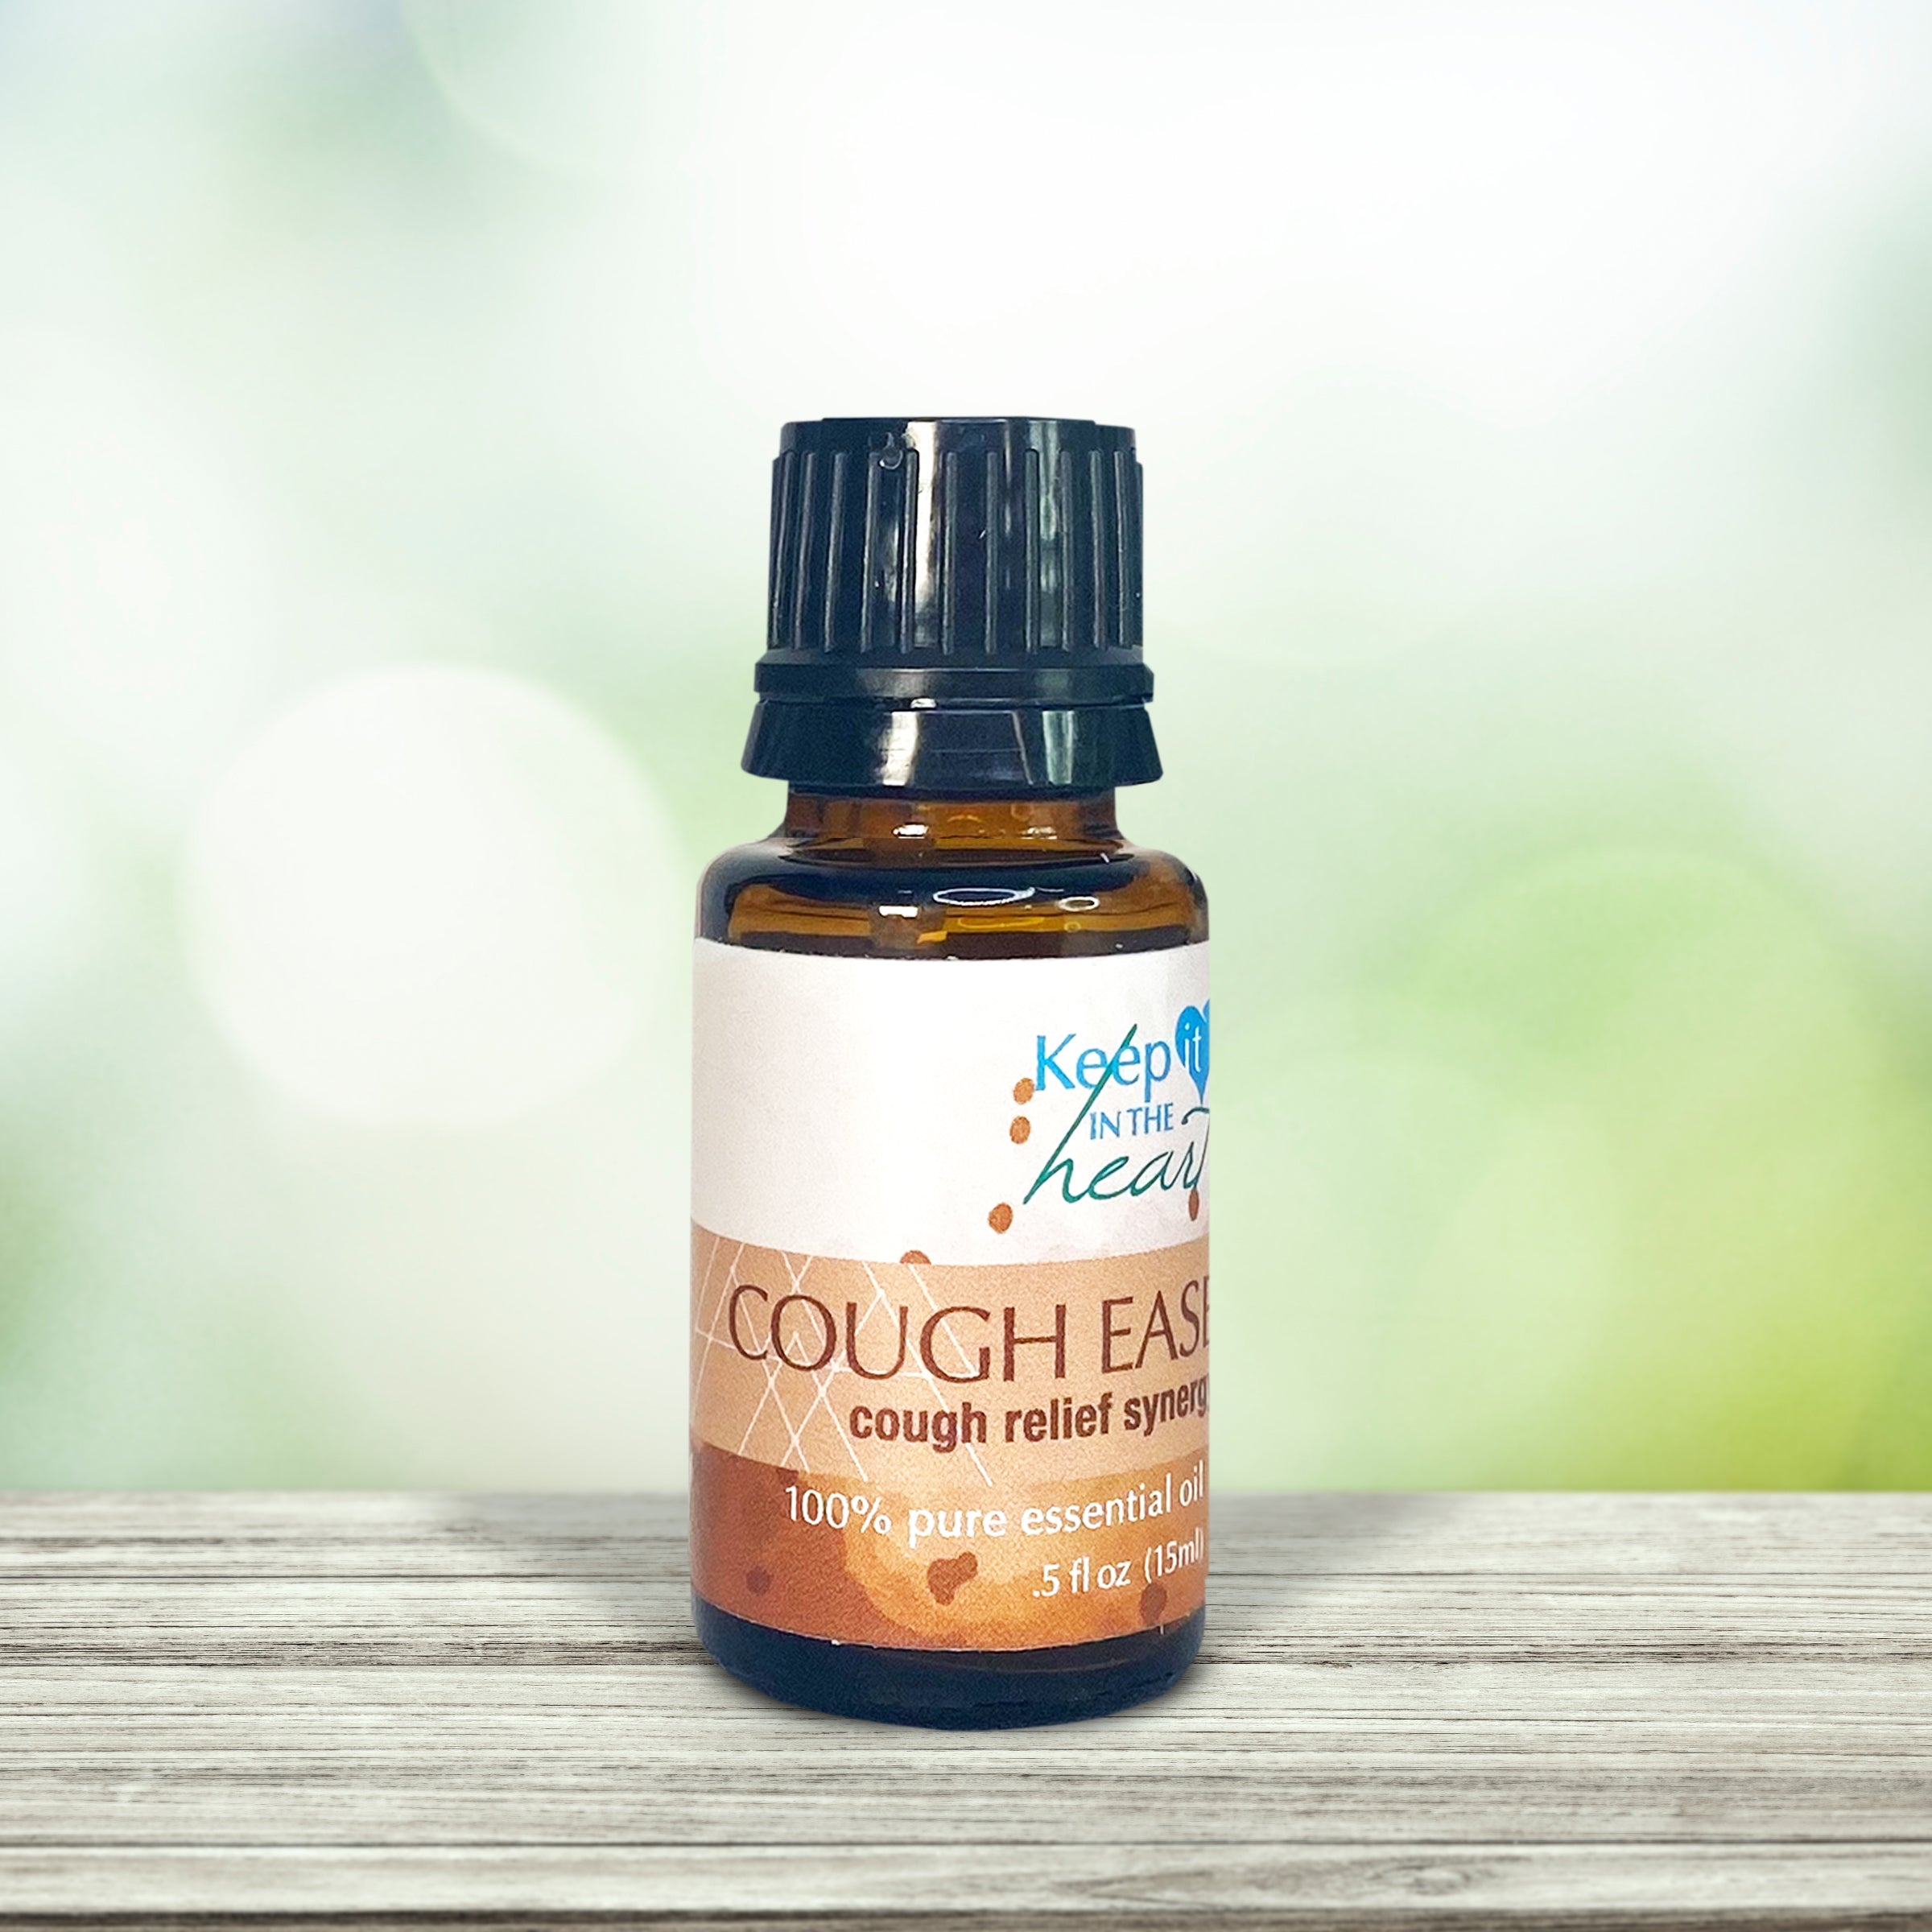 Cough Ease KiiTH Essential Oil Wholesale